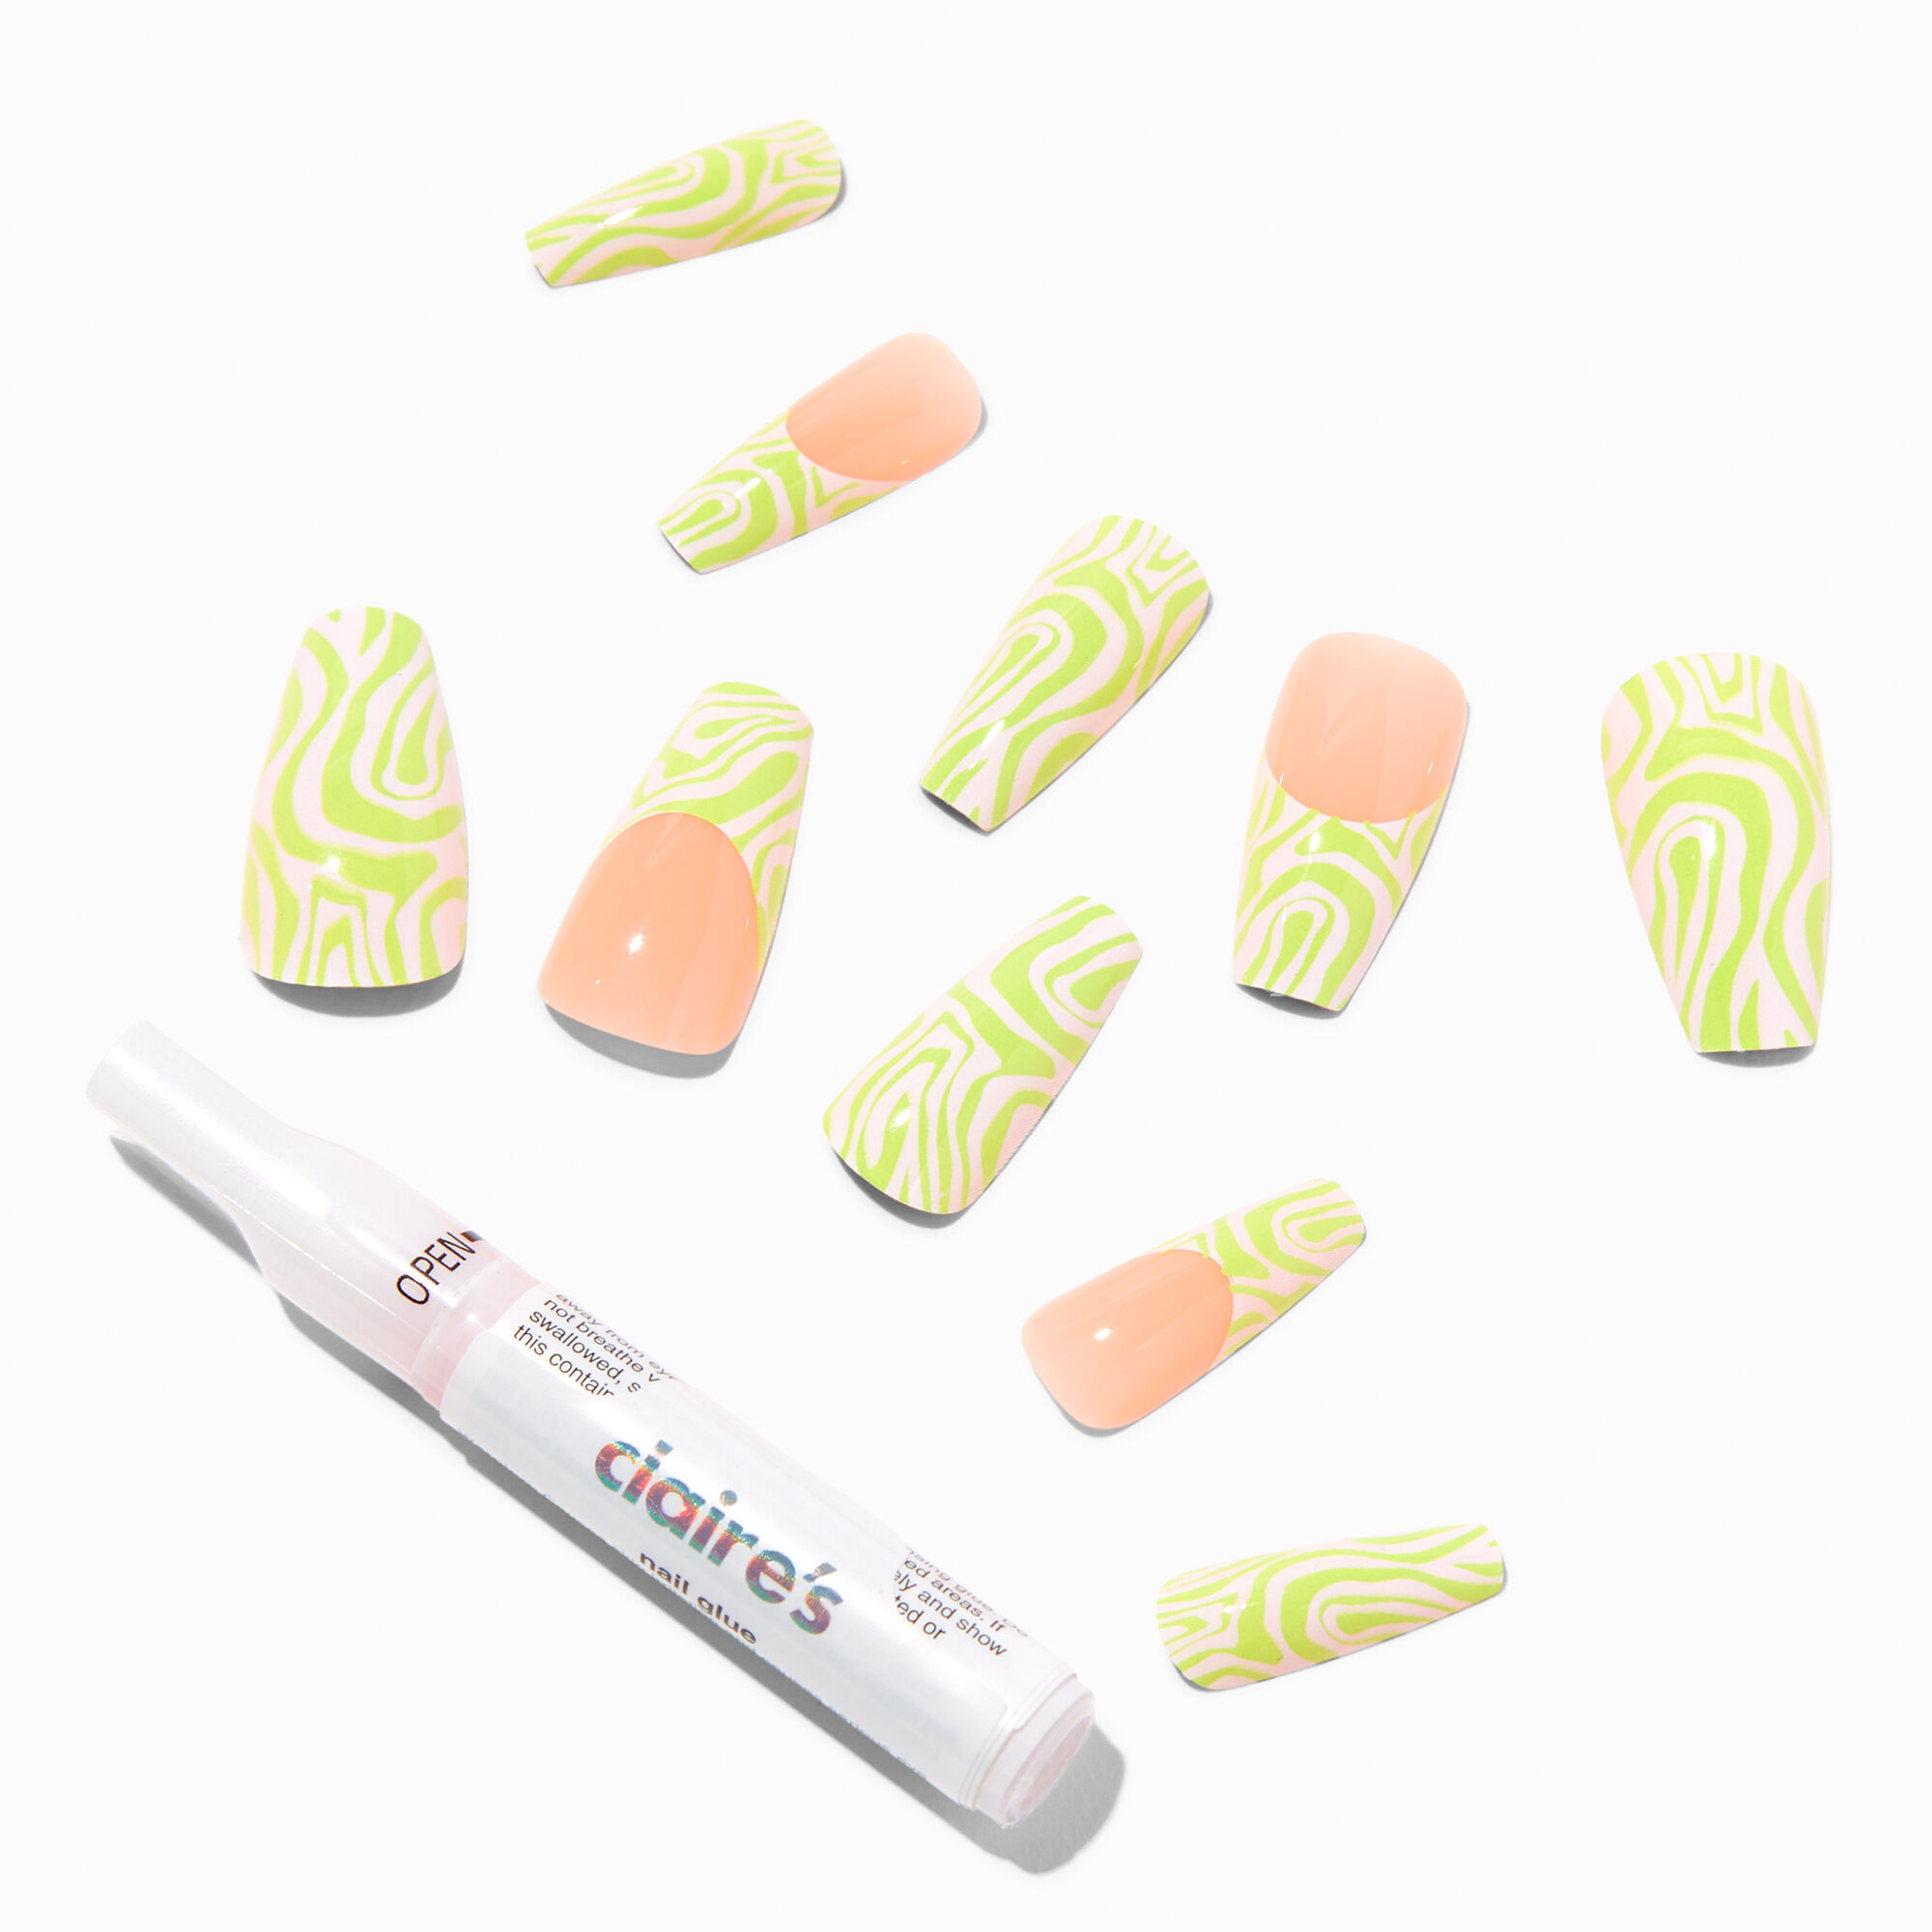 View Claires Swirl Tip Squareletto Vegan Faux Nail Set 24 Pack Lime information